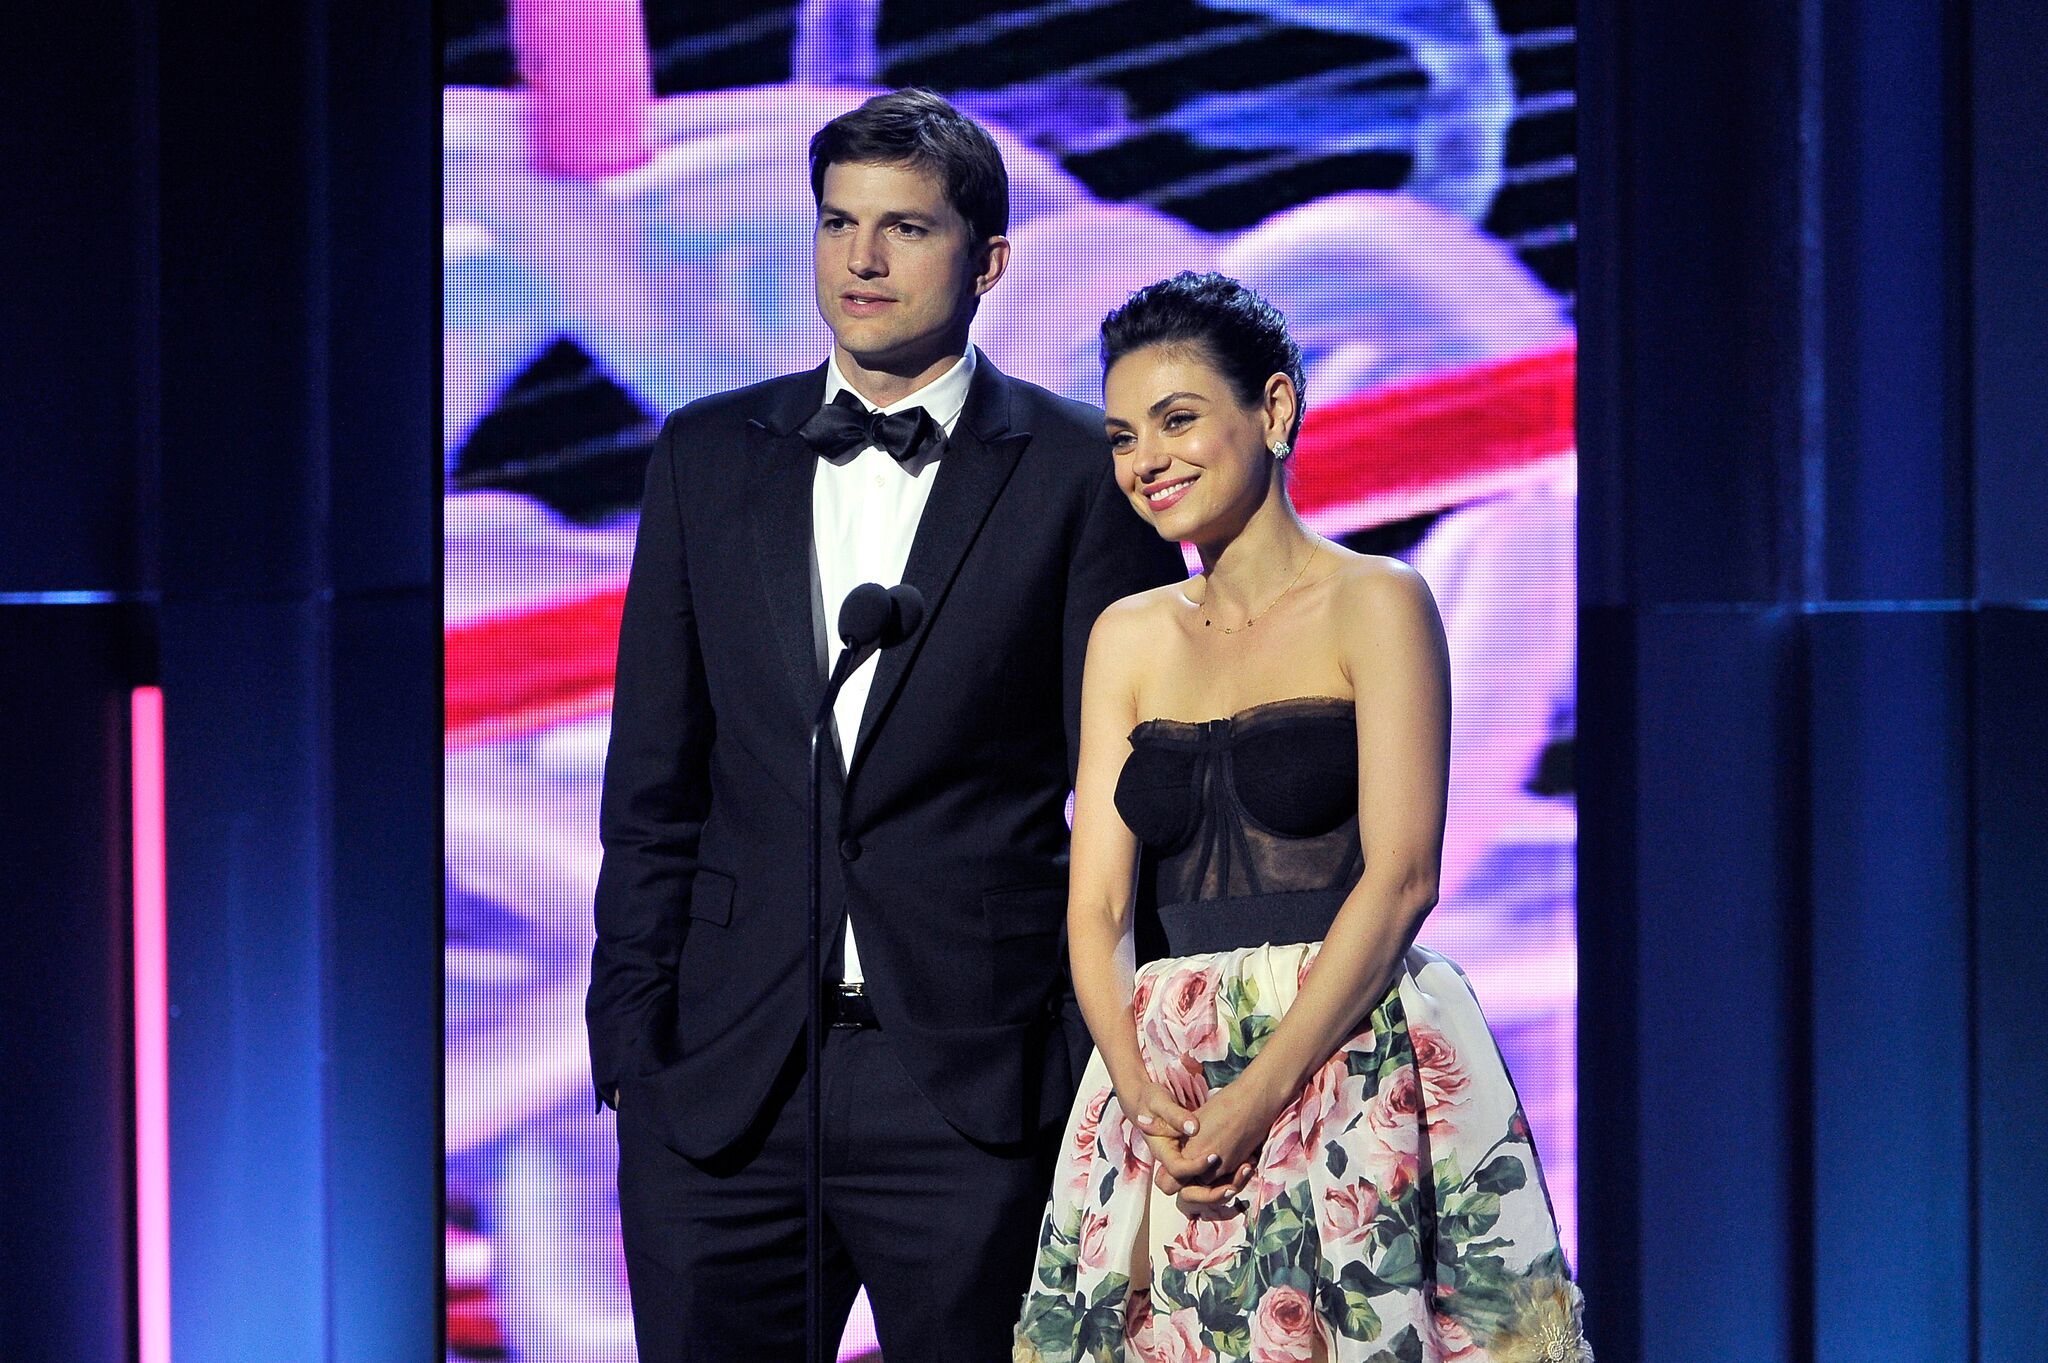 Ashton Kutcher (L) and Mila Kunis speak onstage during the 2018 Breakthrough Prize at NASA Ames Research Center | Getty Images